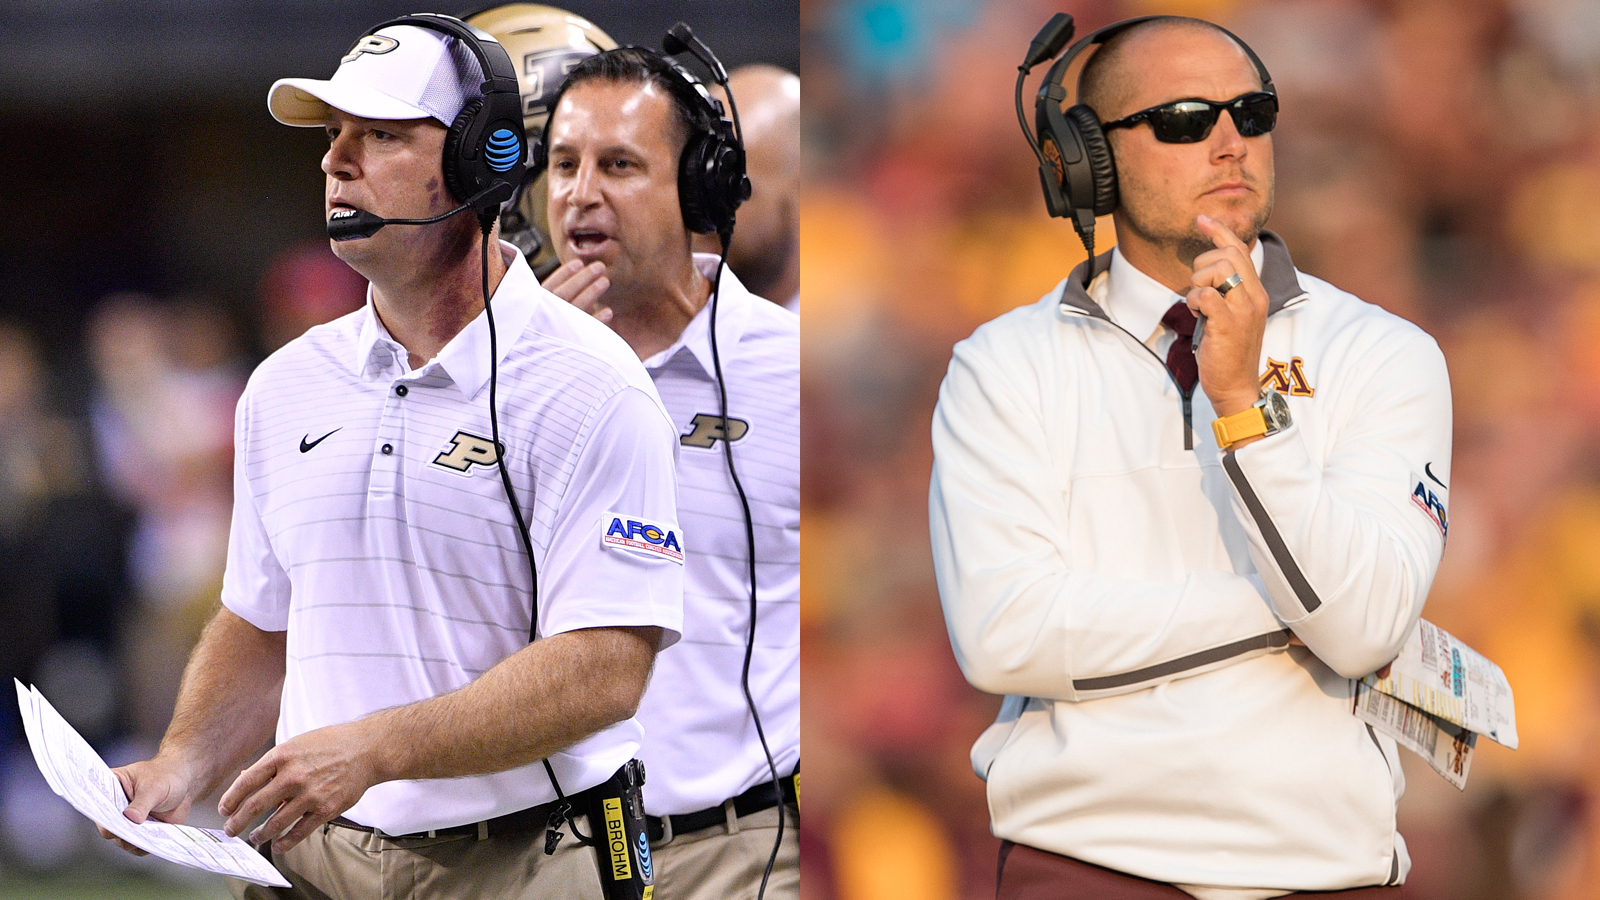 Purdue and Minnesota face off in battle of first-year coaches